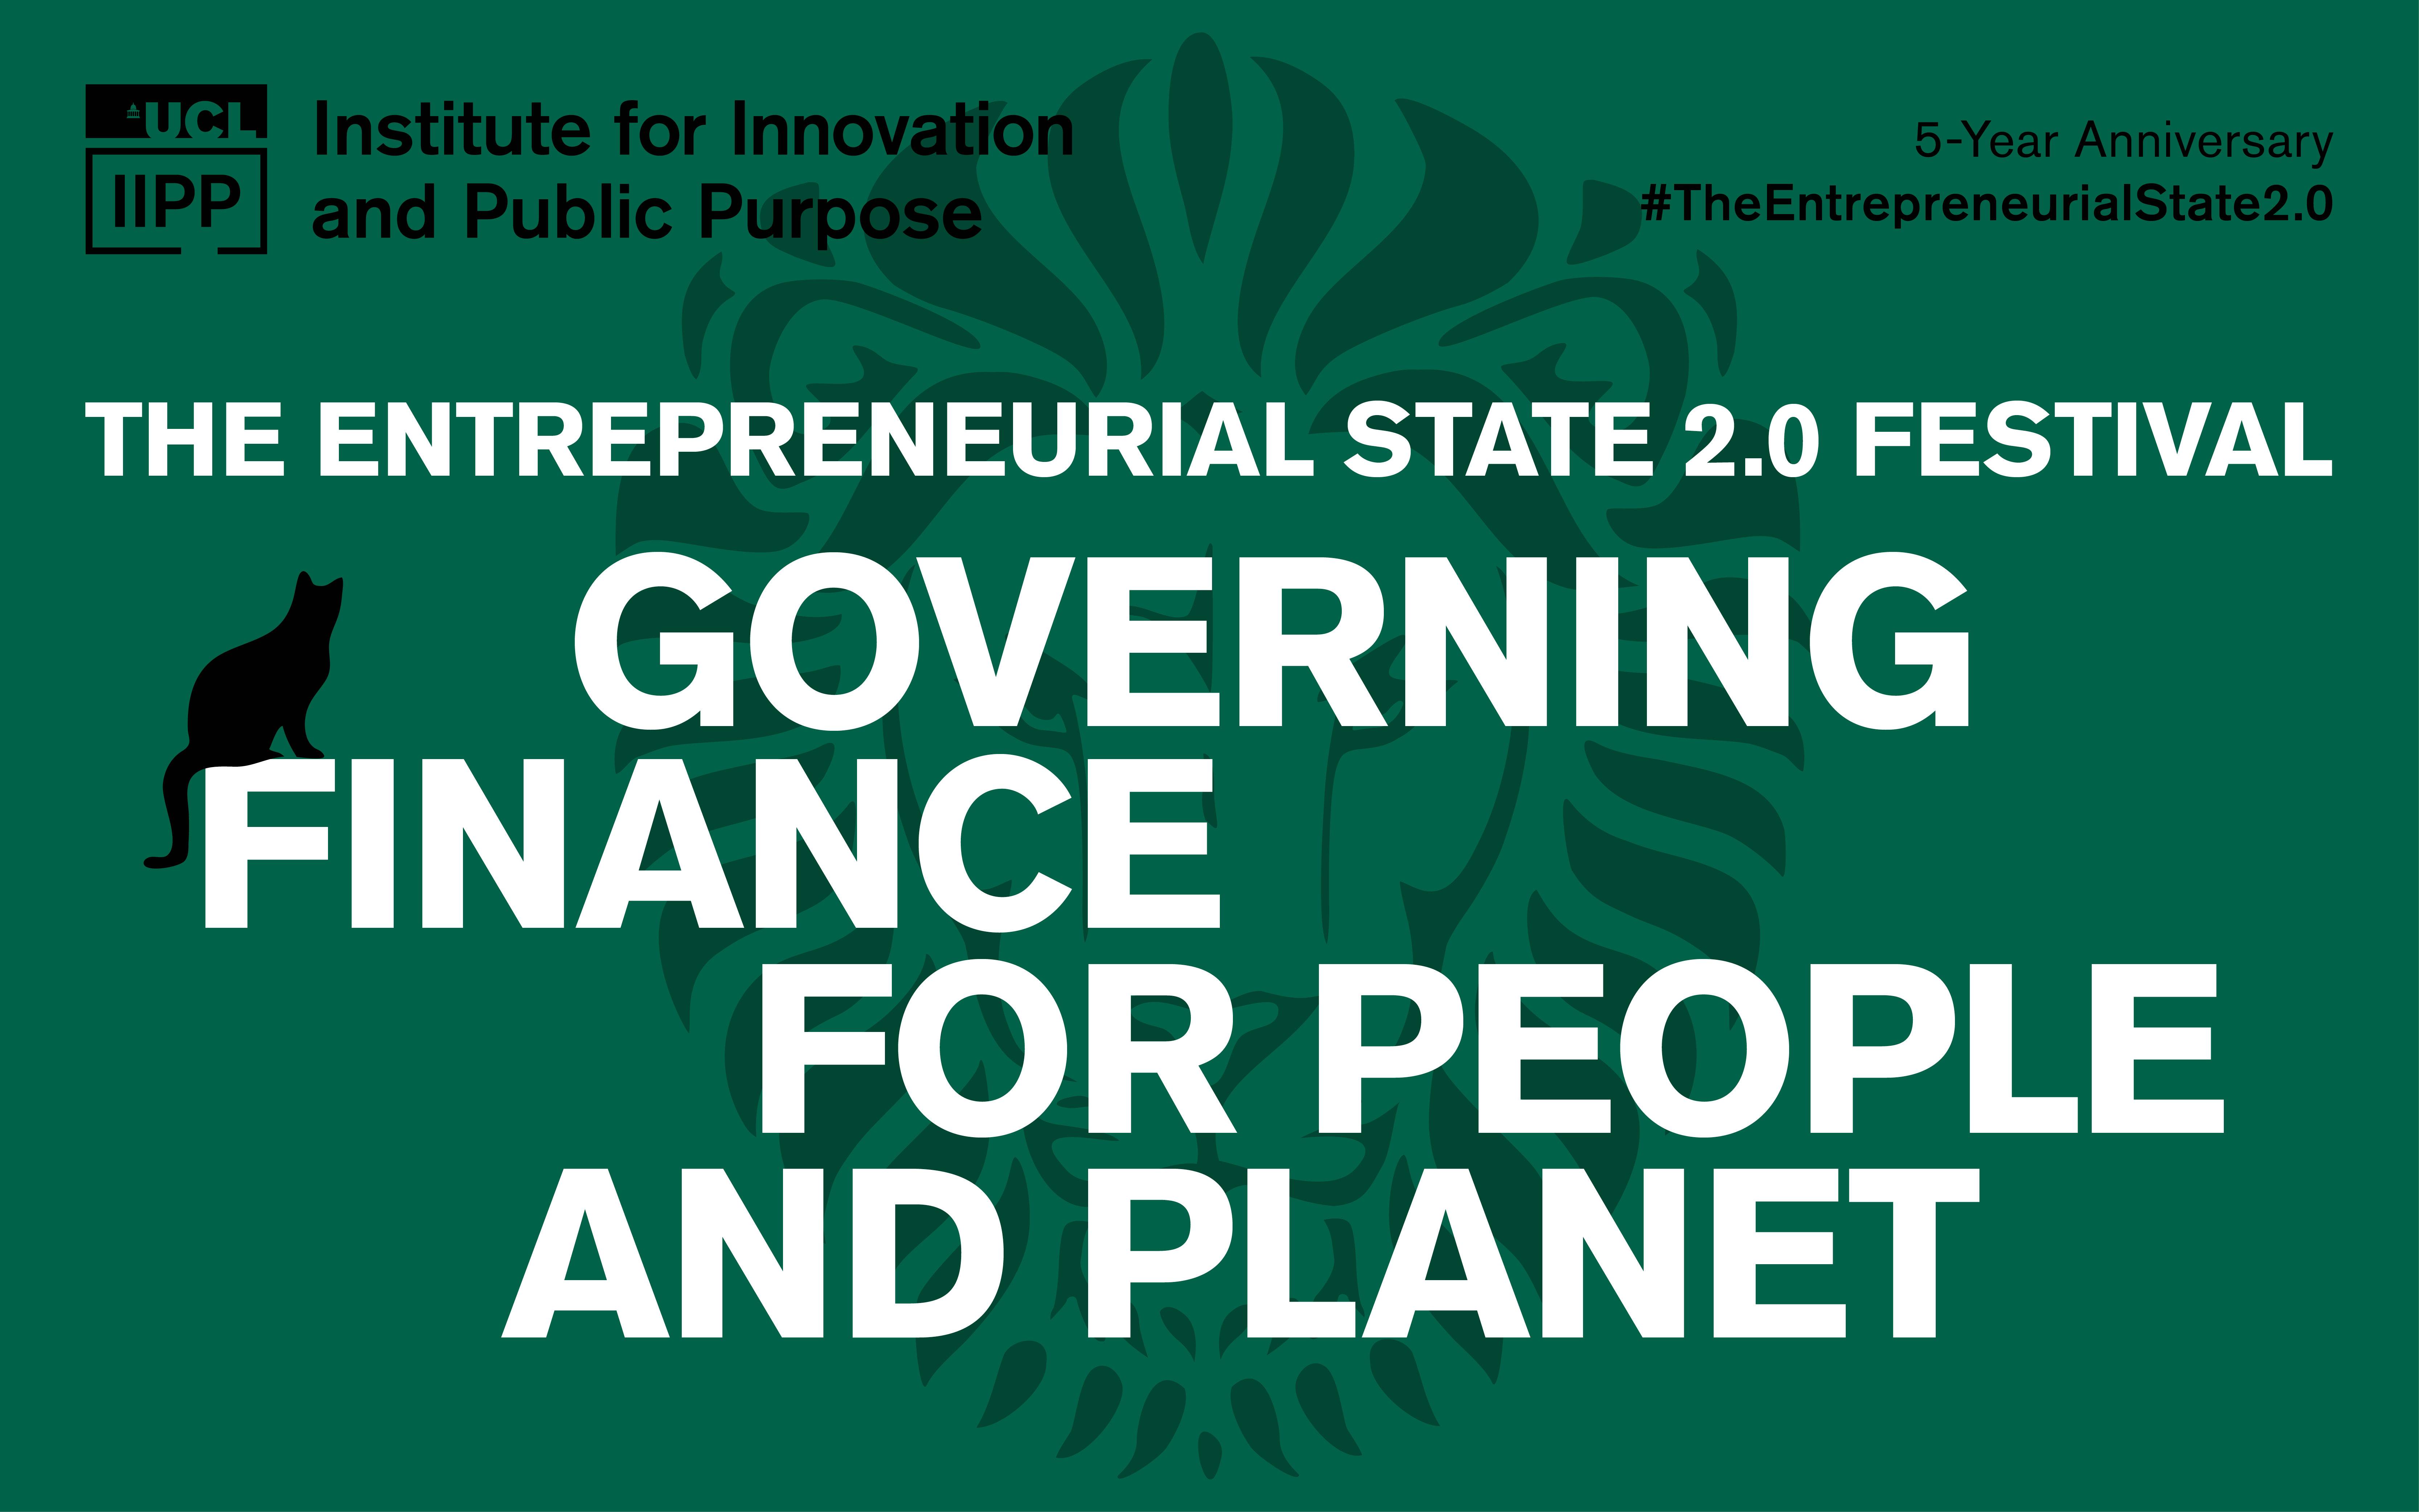 Governing finance for people and planet